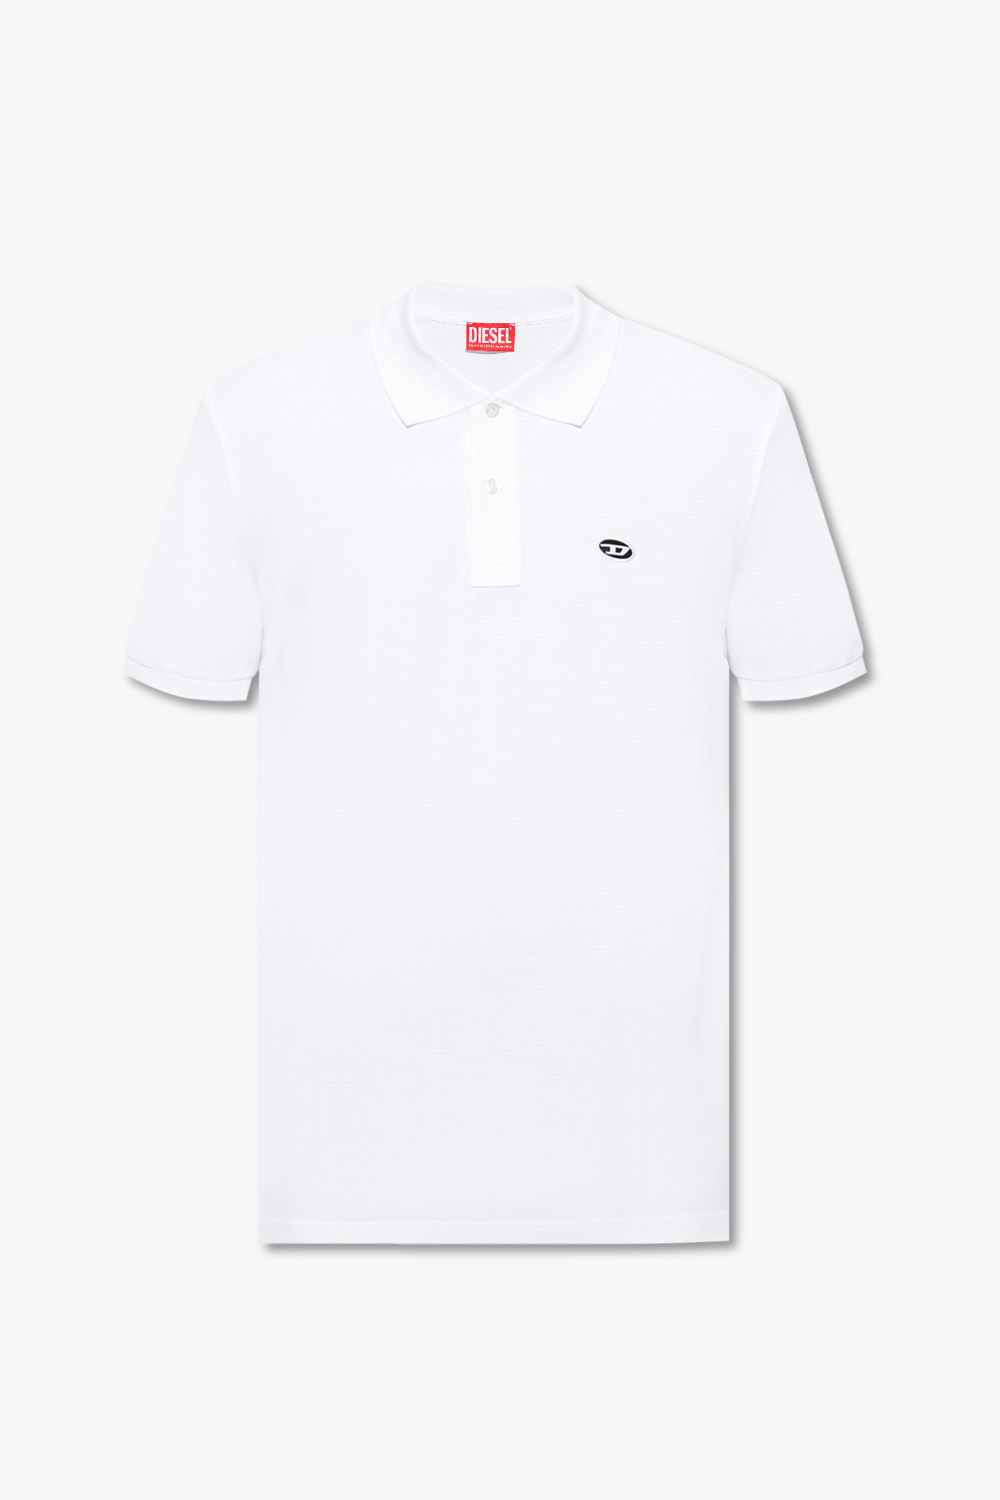 Diesel ‘T-JUST-DOVAL-PJ’ for polo shirt